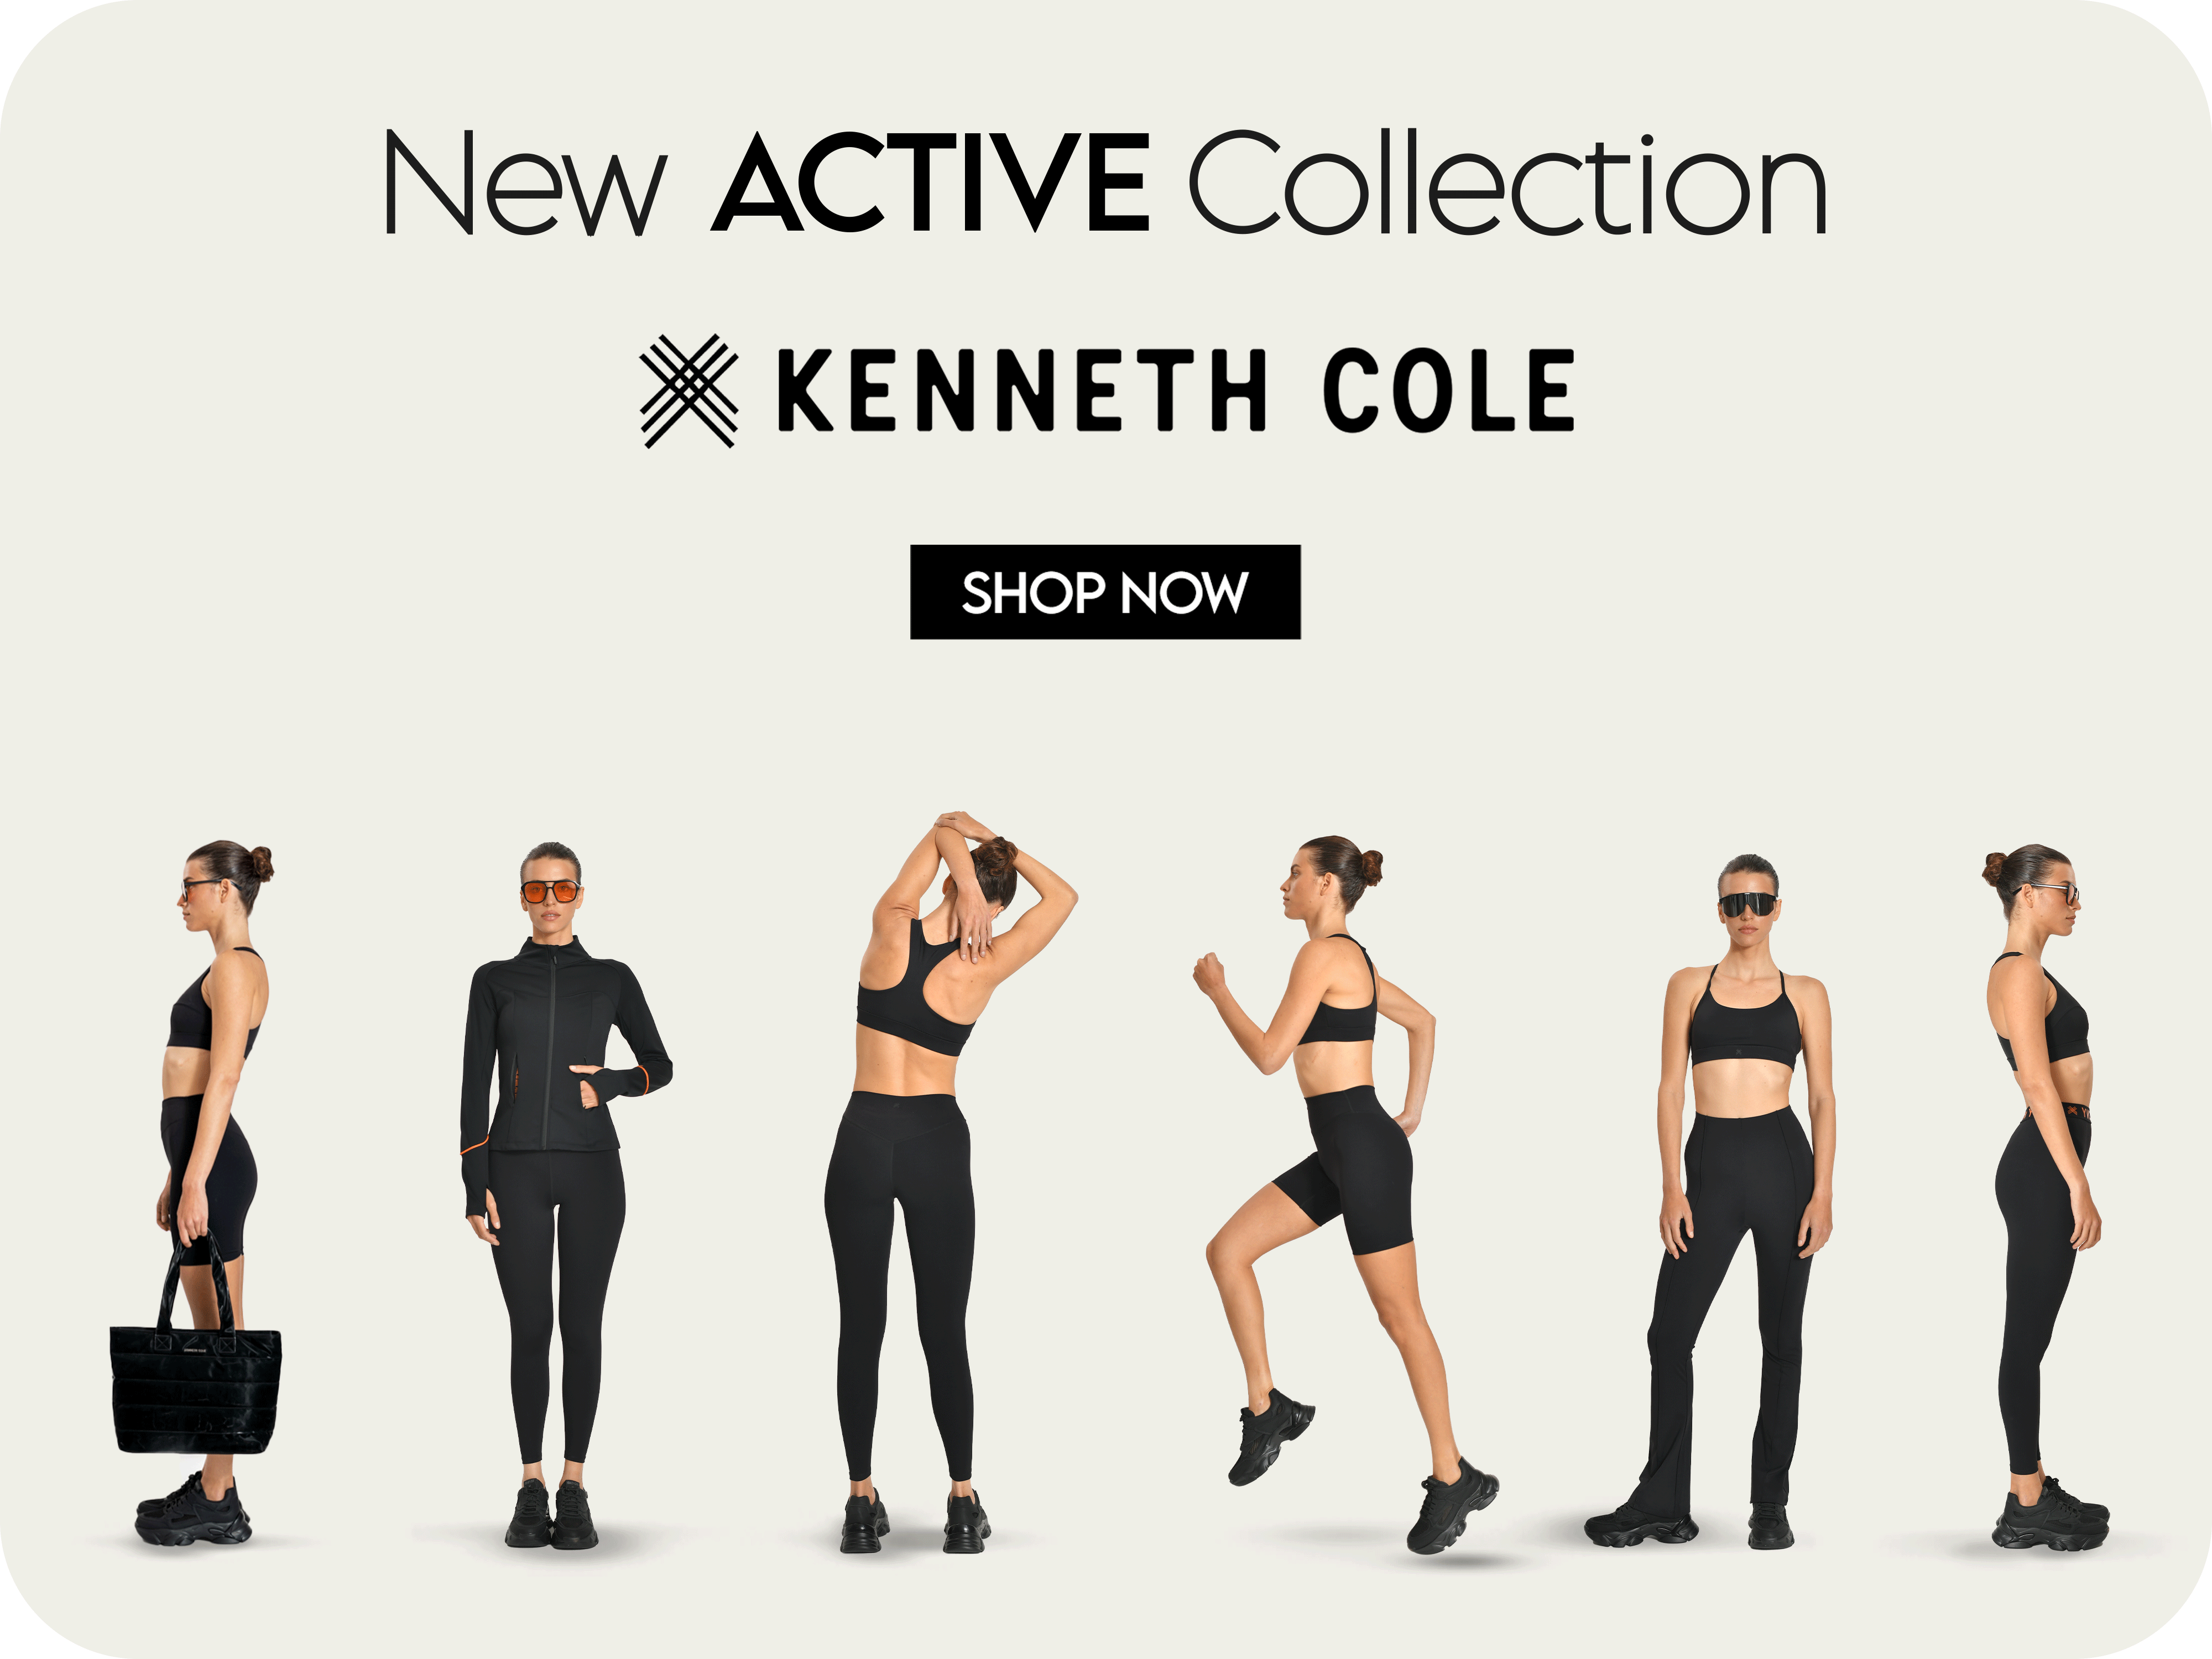 New Active collection - Kenneth Cole